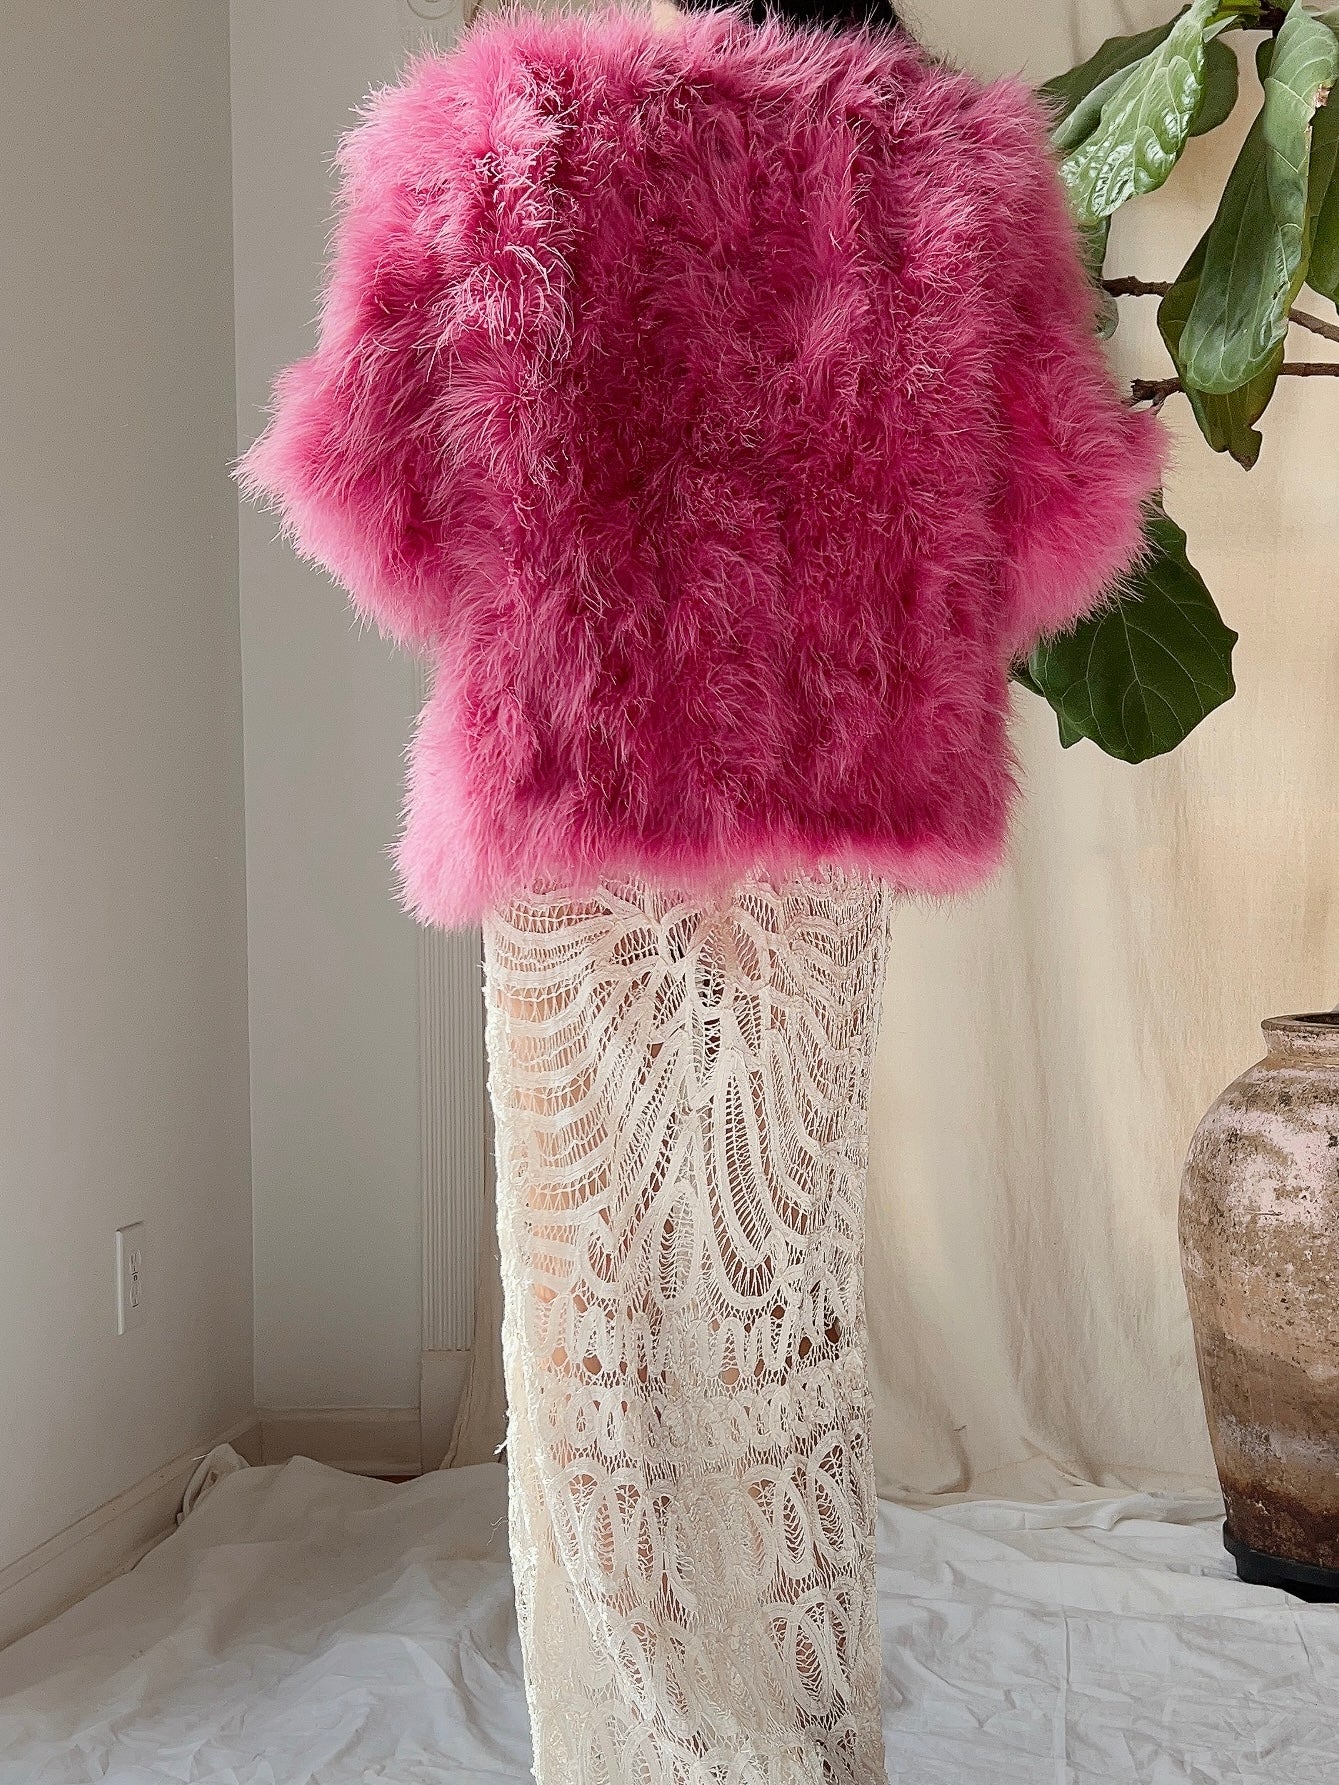 Pink Marabou Feather Jacket - S/M